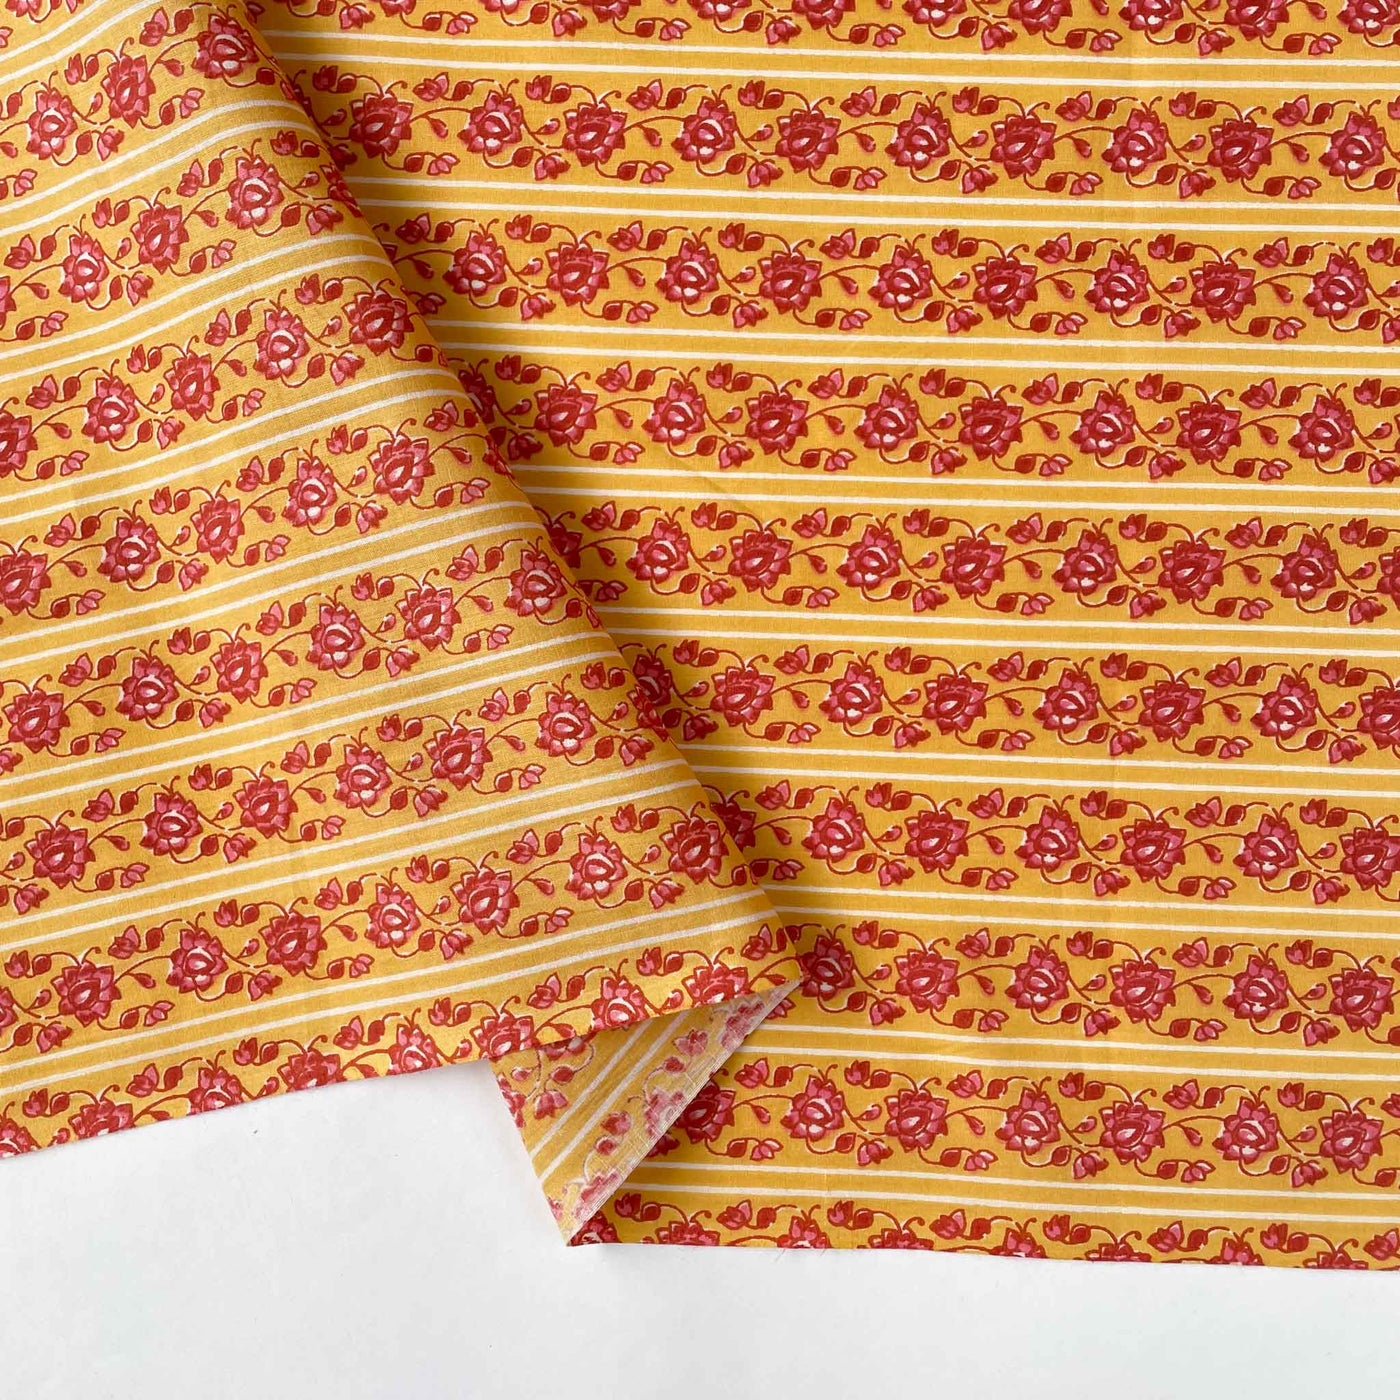 Fabric Pandit Fabric Mango Yellow & Pink Mughal Floral Stripes Hand Block Printed Pure Cotton Cambric Fabric (Width 42 Inches)